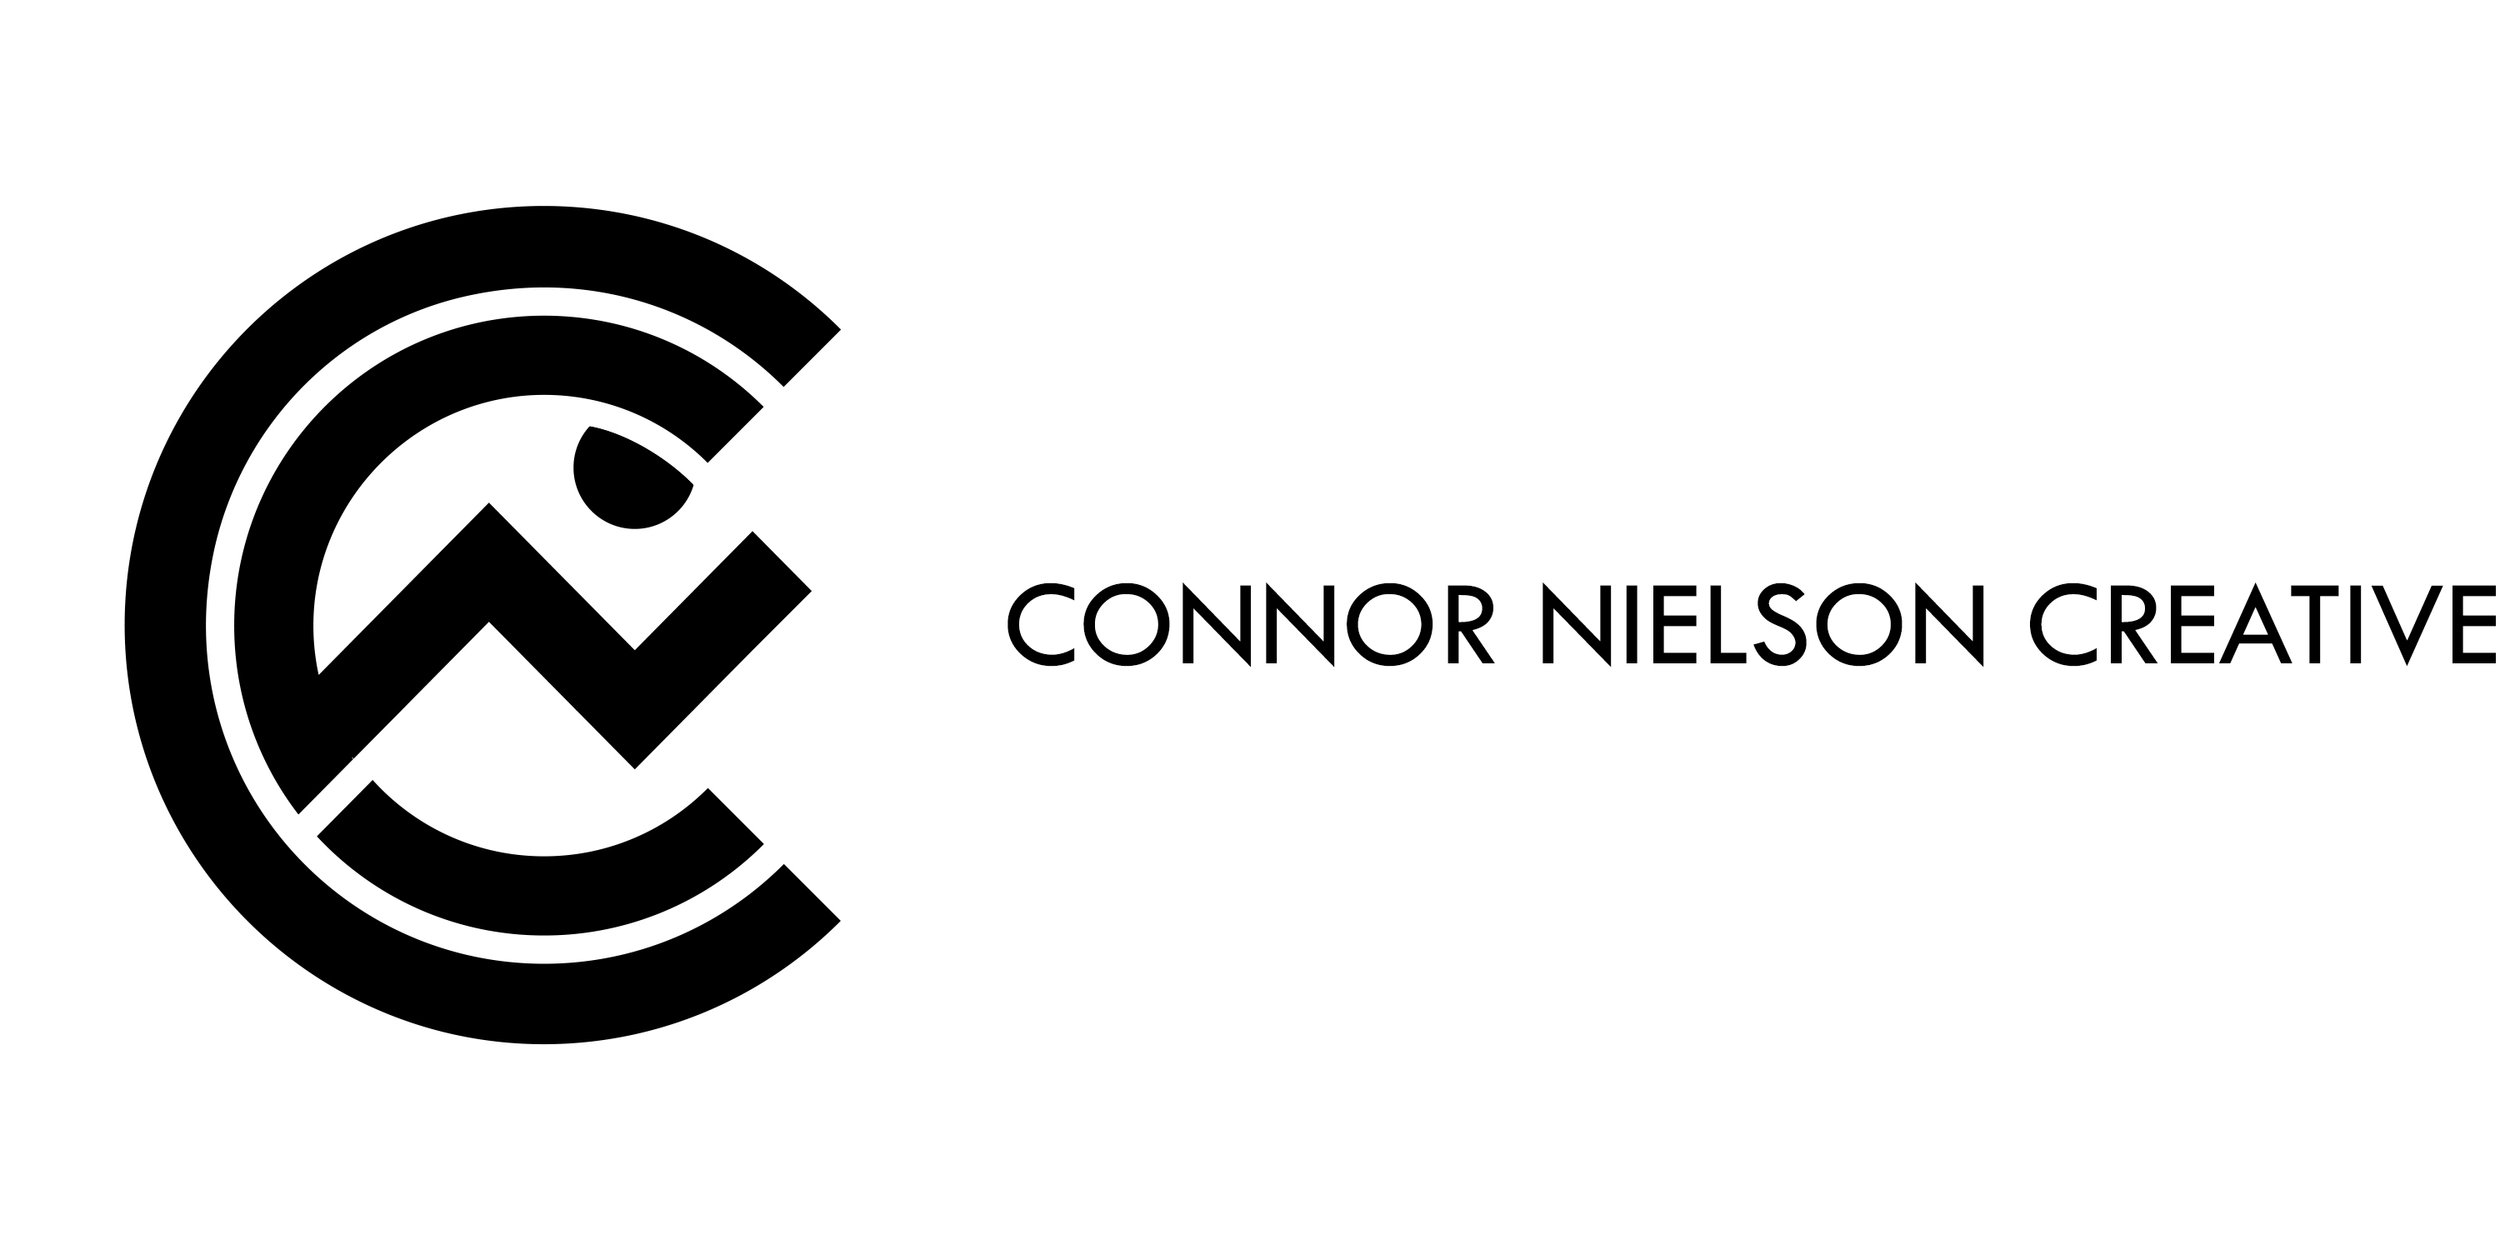 Connor Nielson Creative